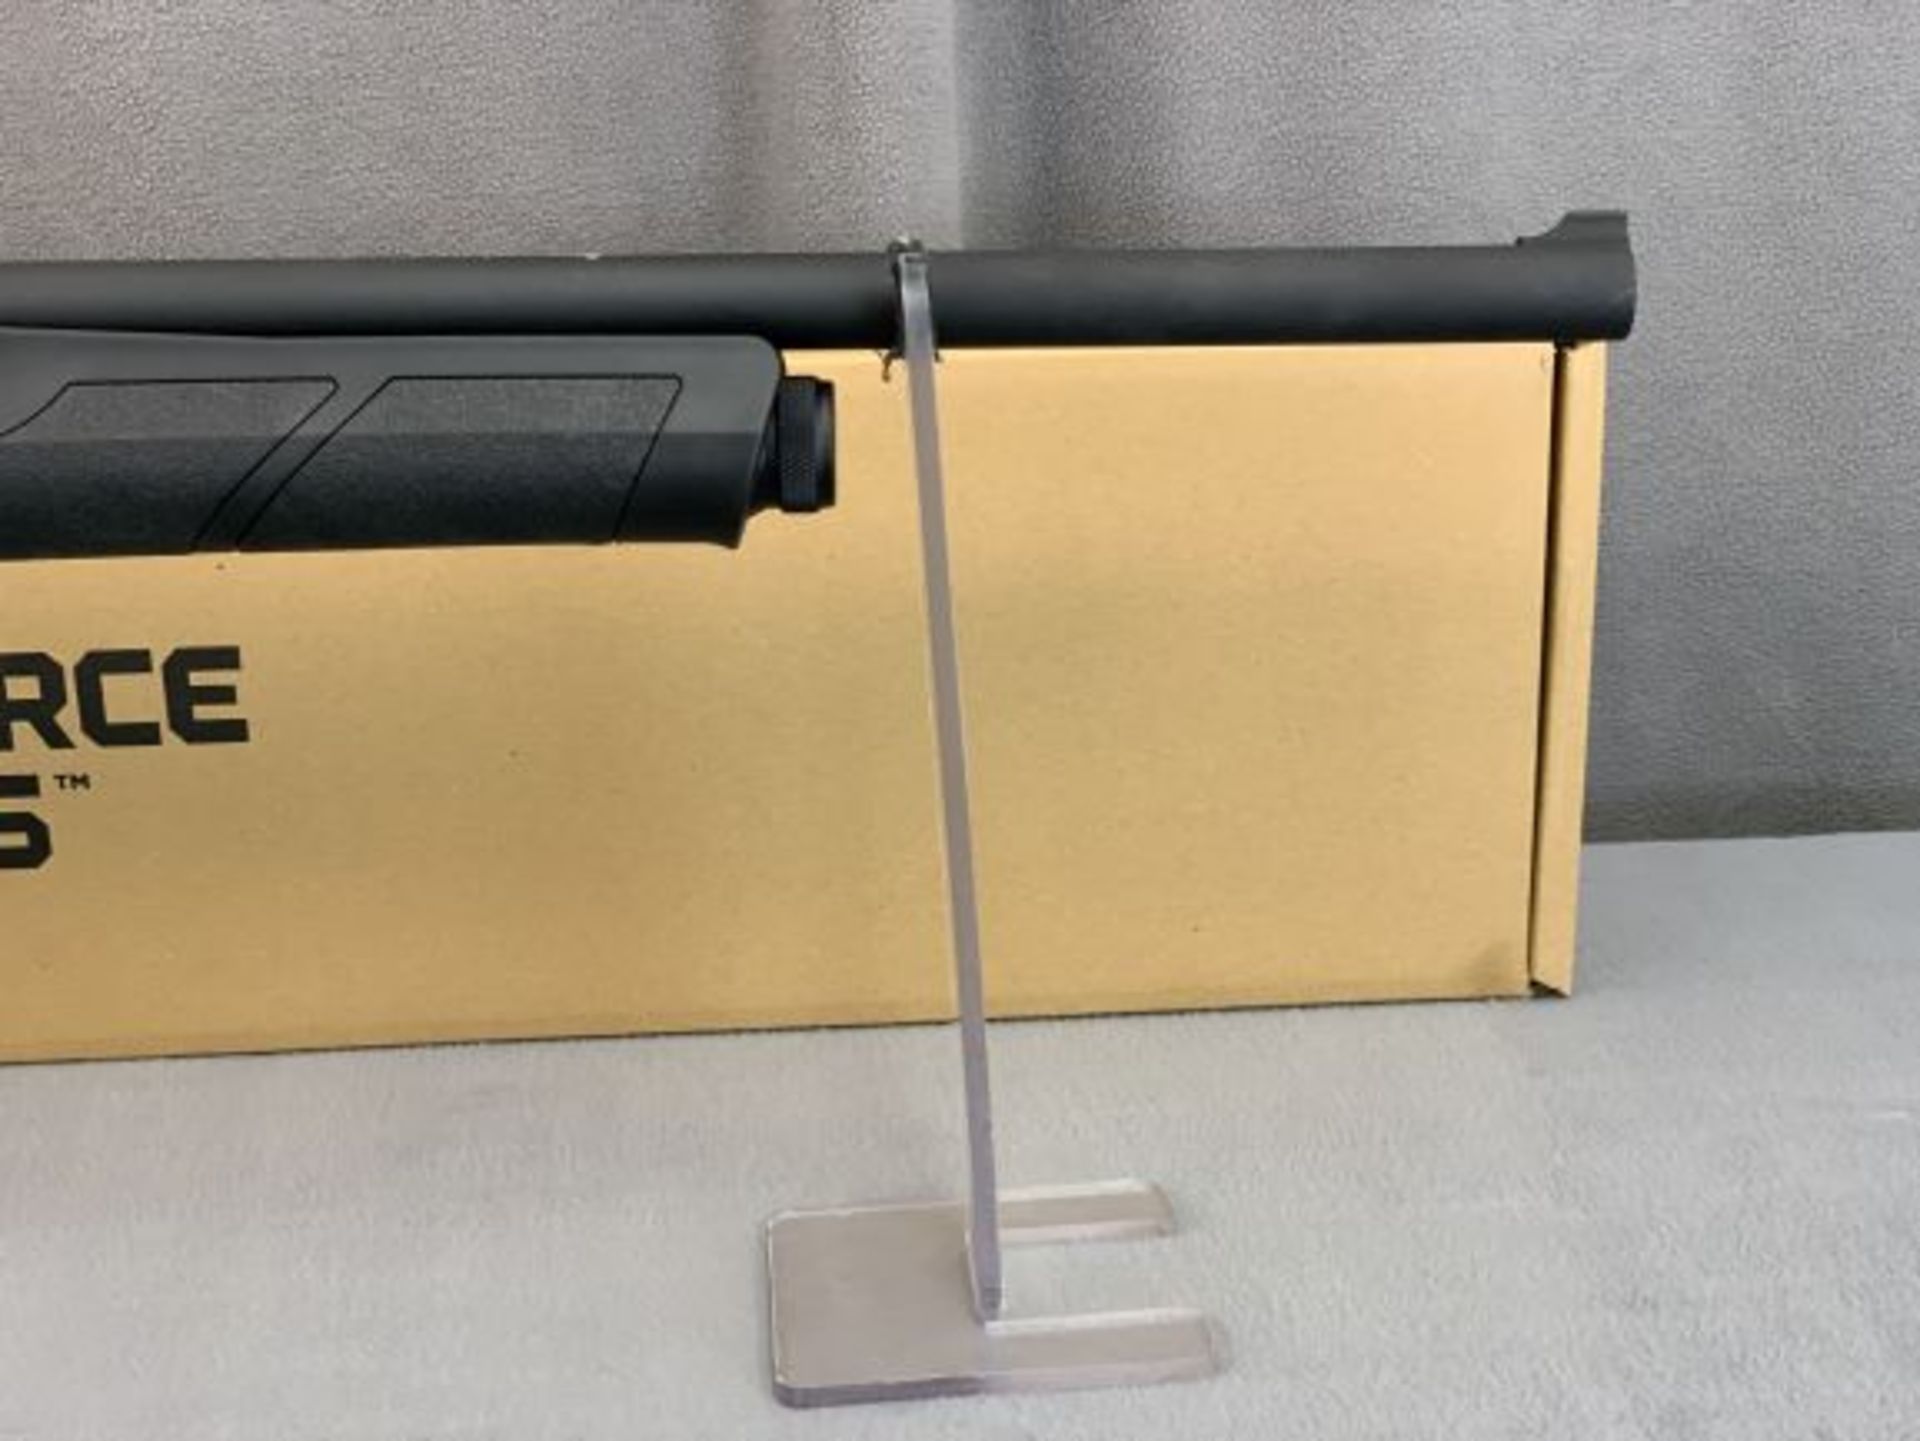 41. G-Force Arms 12ga Tactical 3"""" Chamber SN: 20-38029 - Image 4 of 11